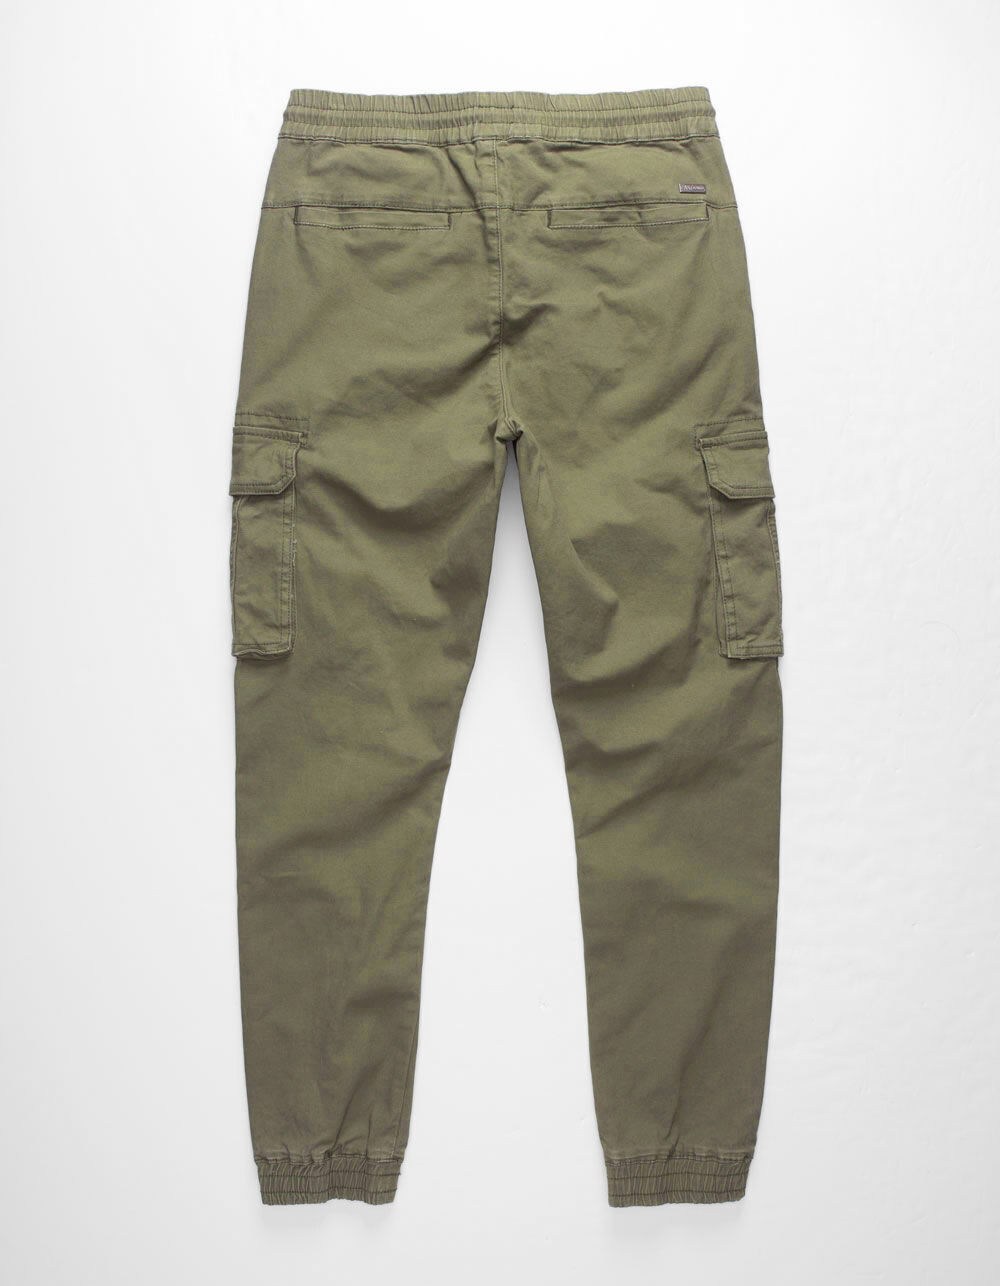 EAST POINTE Twill Cargo Pockets Olive Mens Jogger Pants image number 2